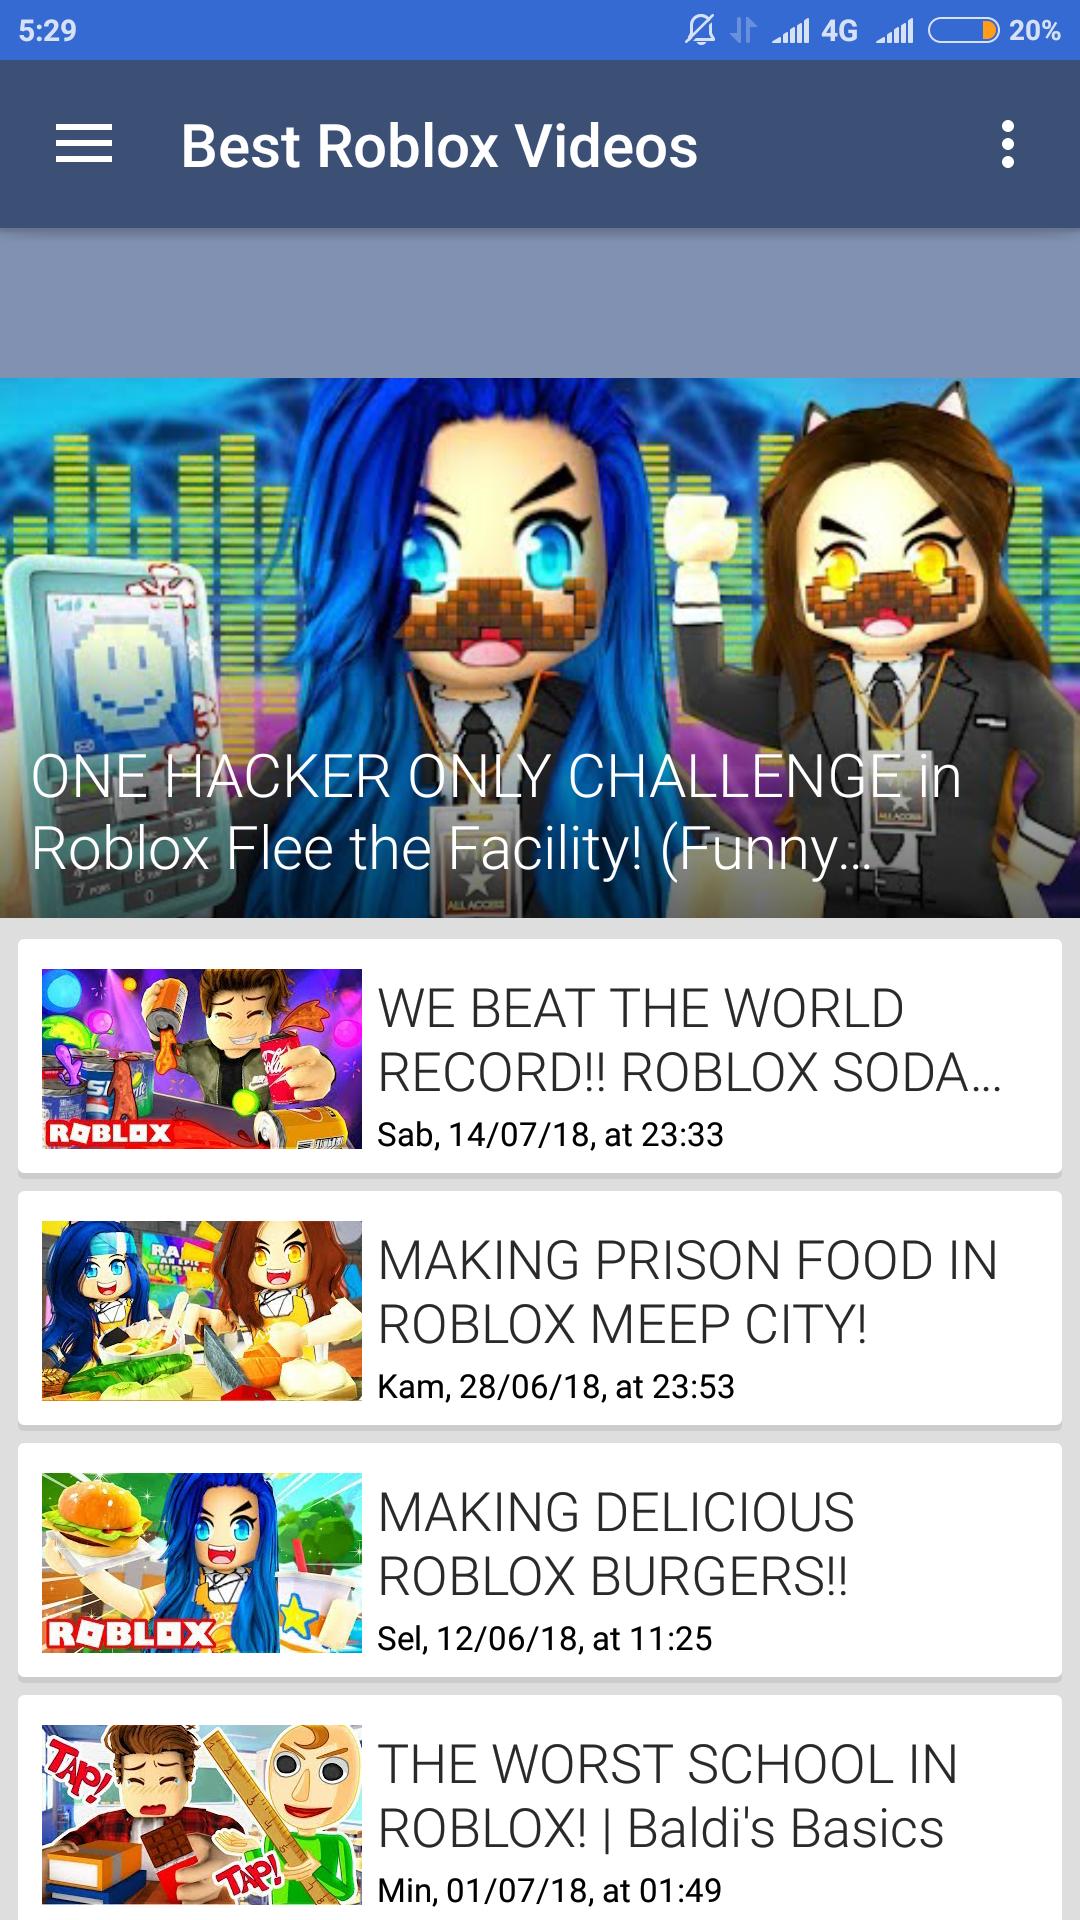 Video For Itsfunneh Roblox For Android Apk Download - roblox videos with itsfunneh mad dreams